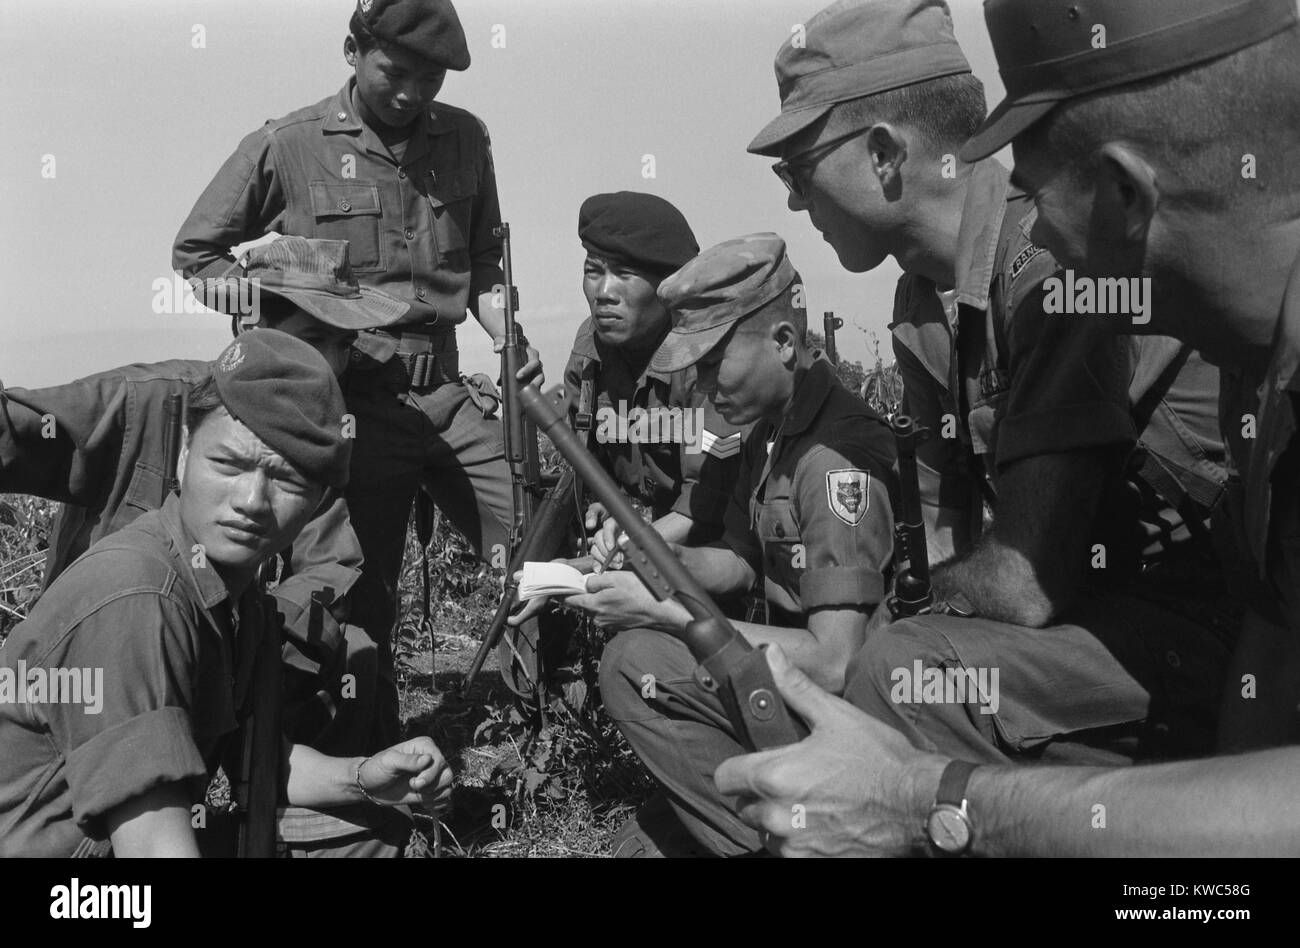 South Vietnamese soldiers with American soldiers during a military operation in South Vietnam. Feb. 12, 1962. Photo by Robert Pepper Martin. (BSLOC 2015 14 133) Stock Photo